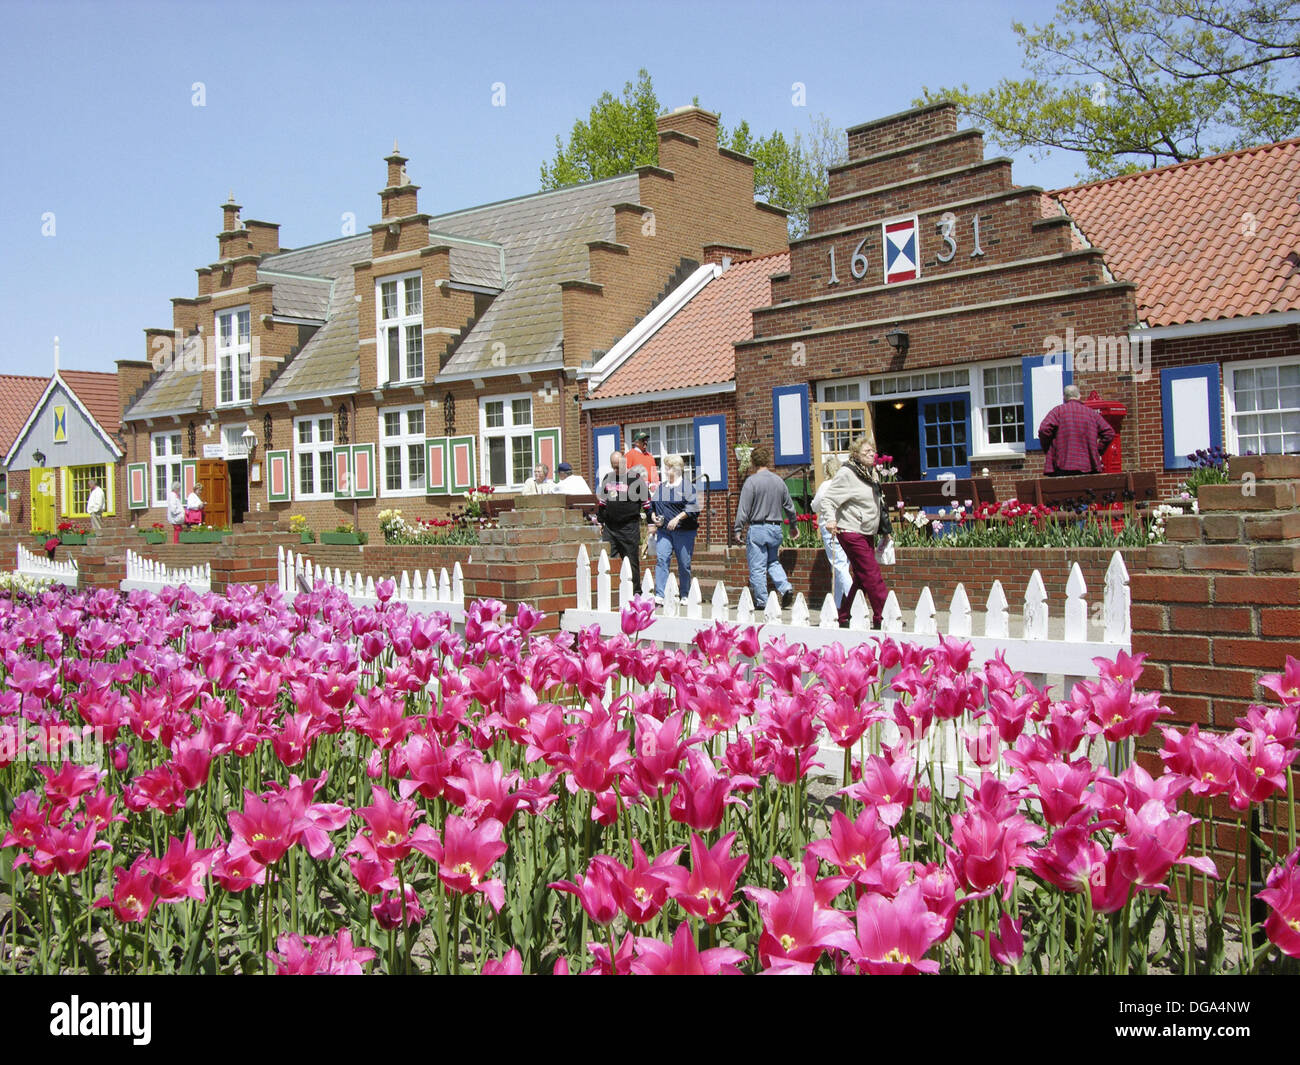 Holland, Michigan. USA. Tulip Festival. Tulip Flowers and shops on